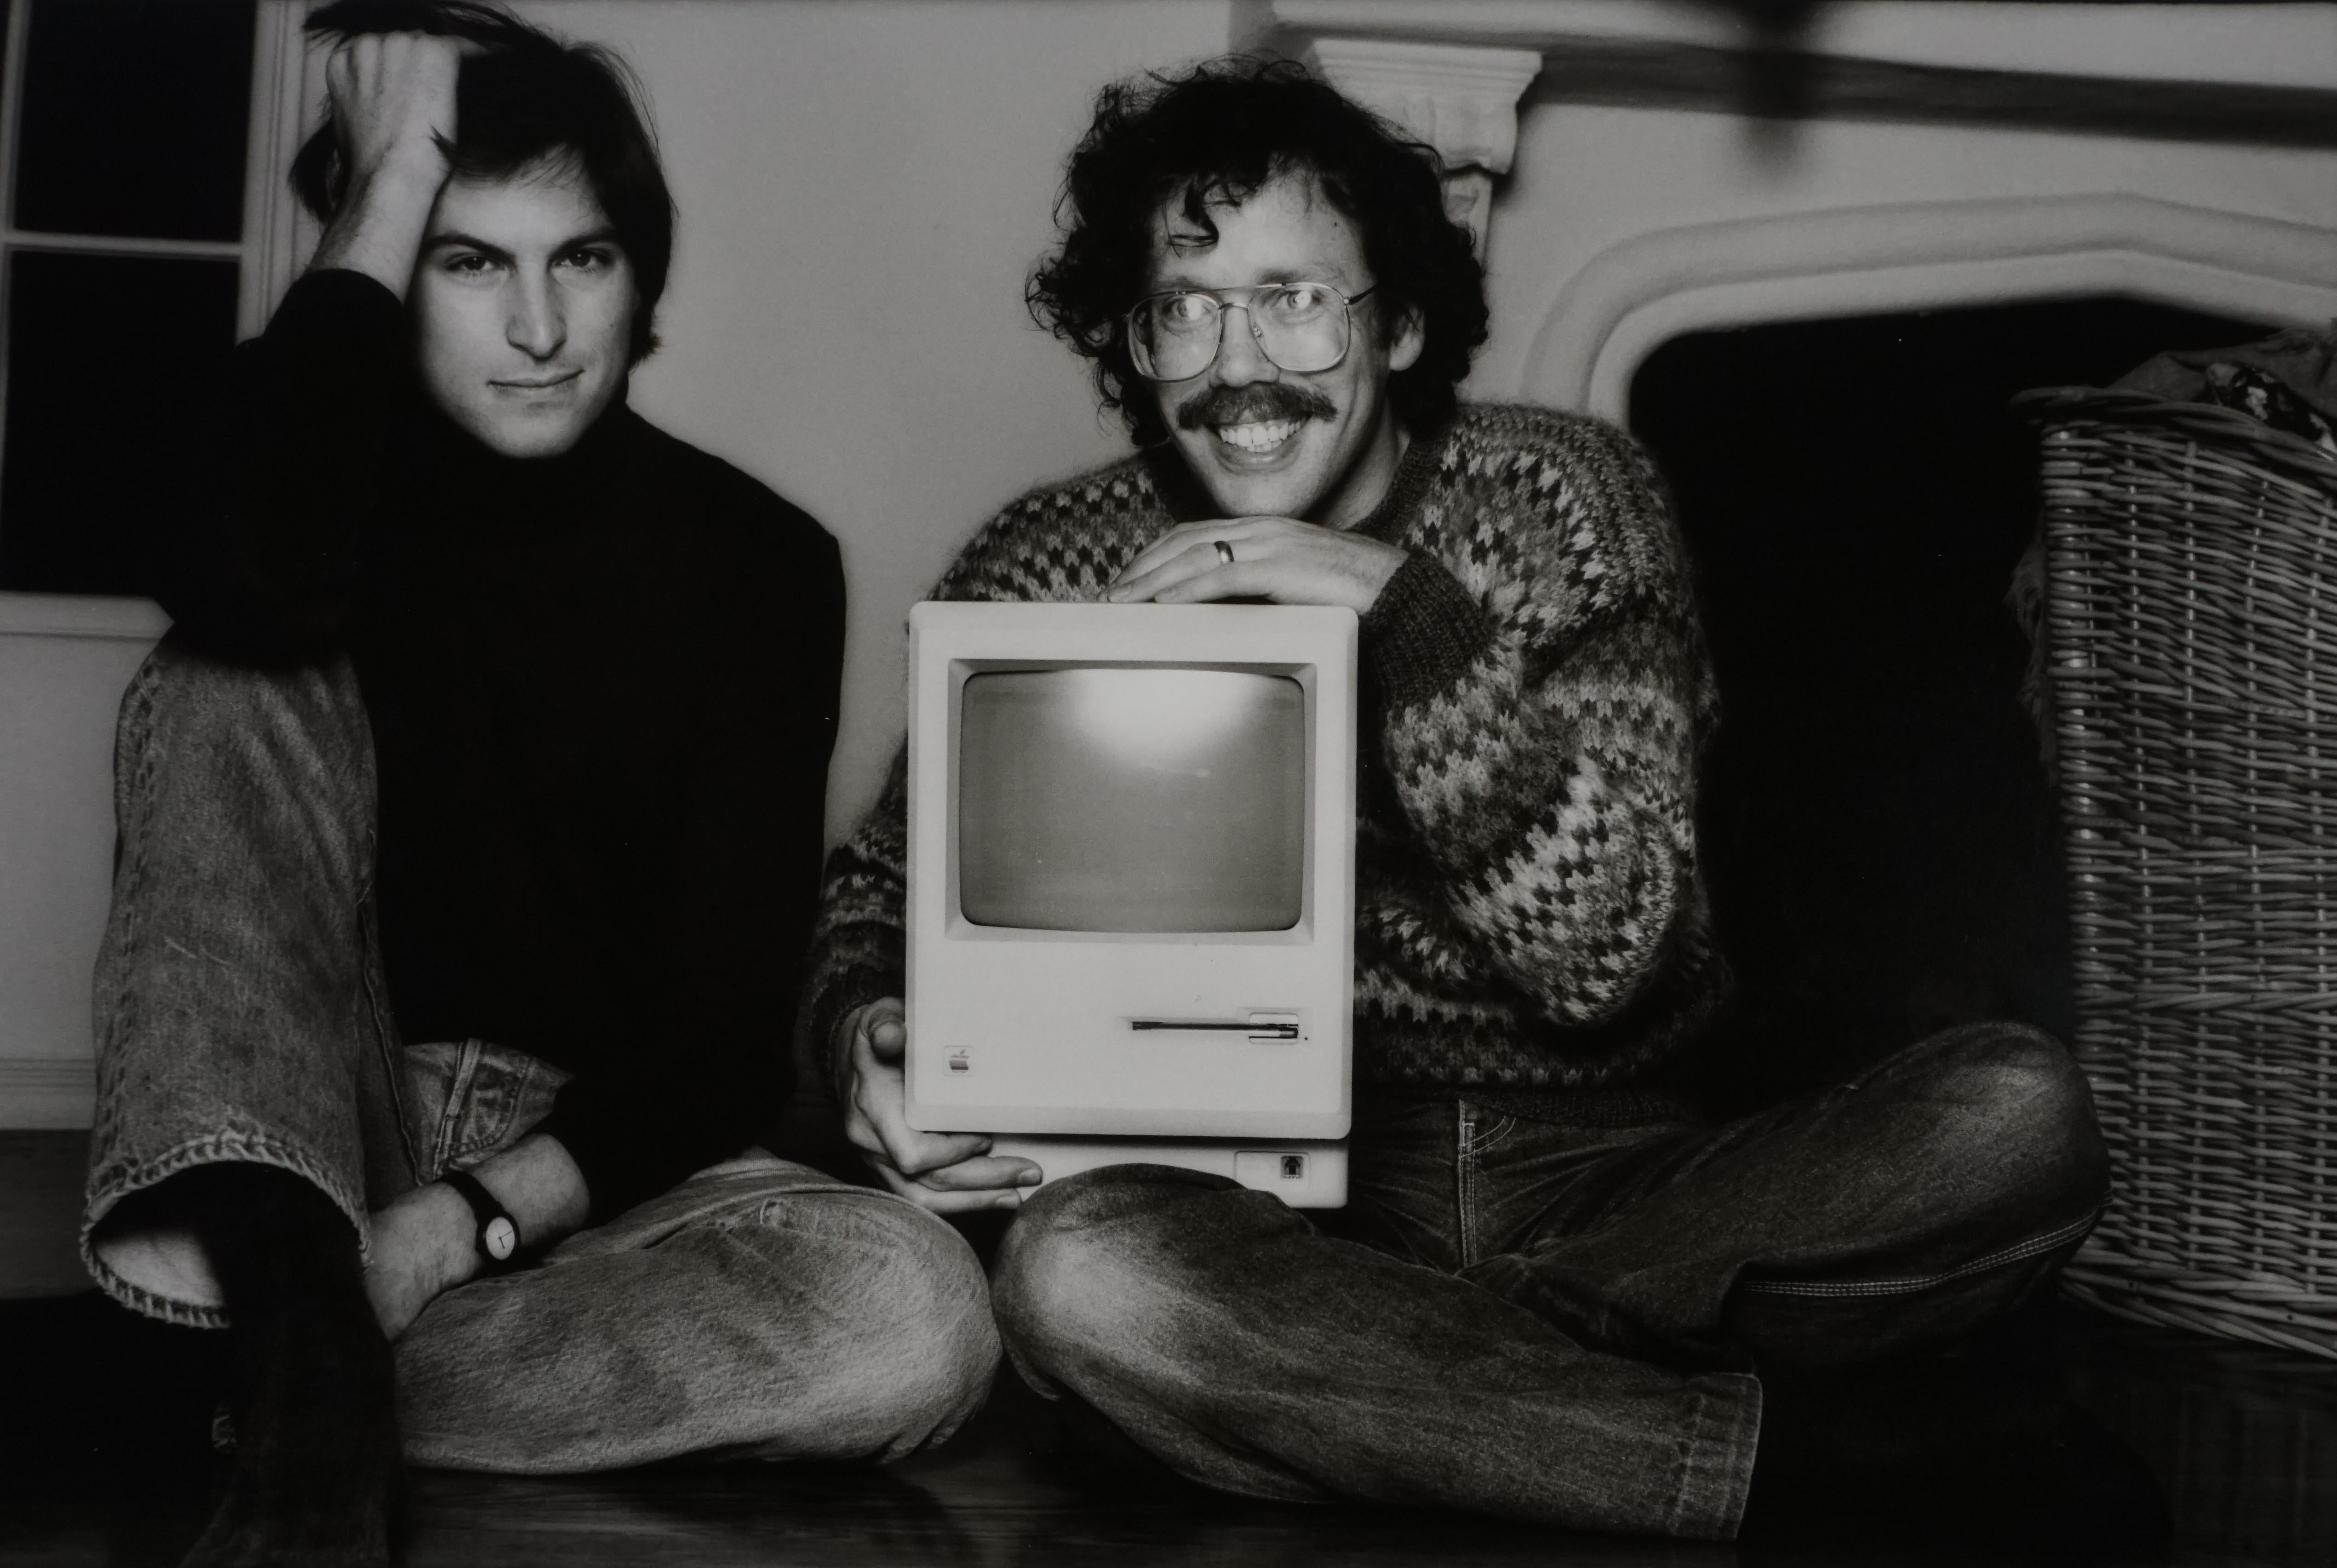 Norman Seeff Black and White Photograph - Steve Jobs and Bill Atkinson, Woodside CA, 1984